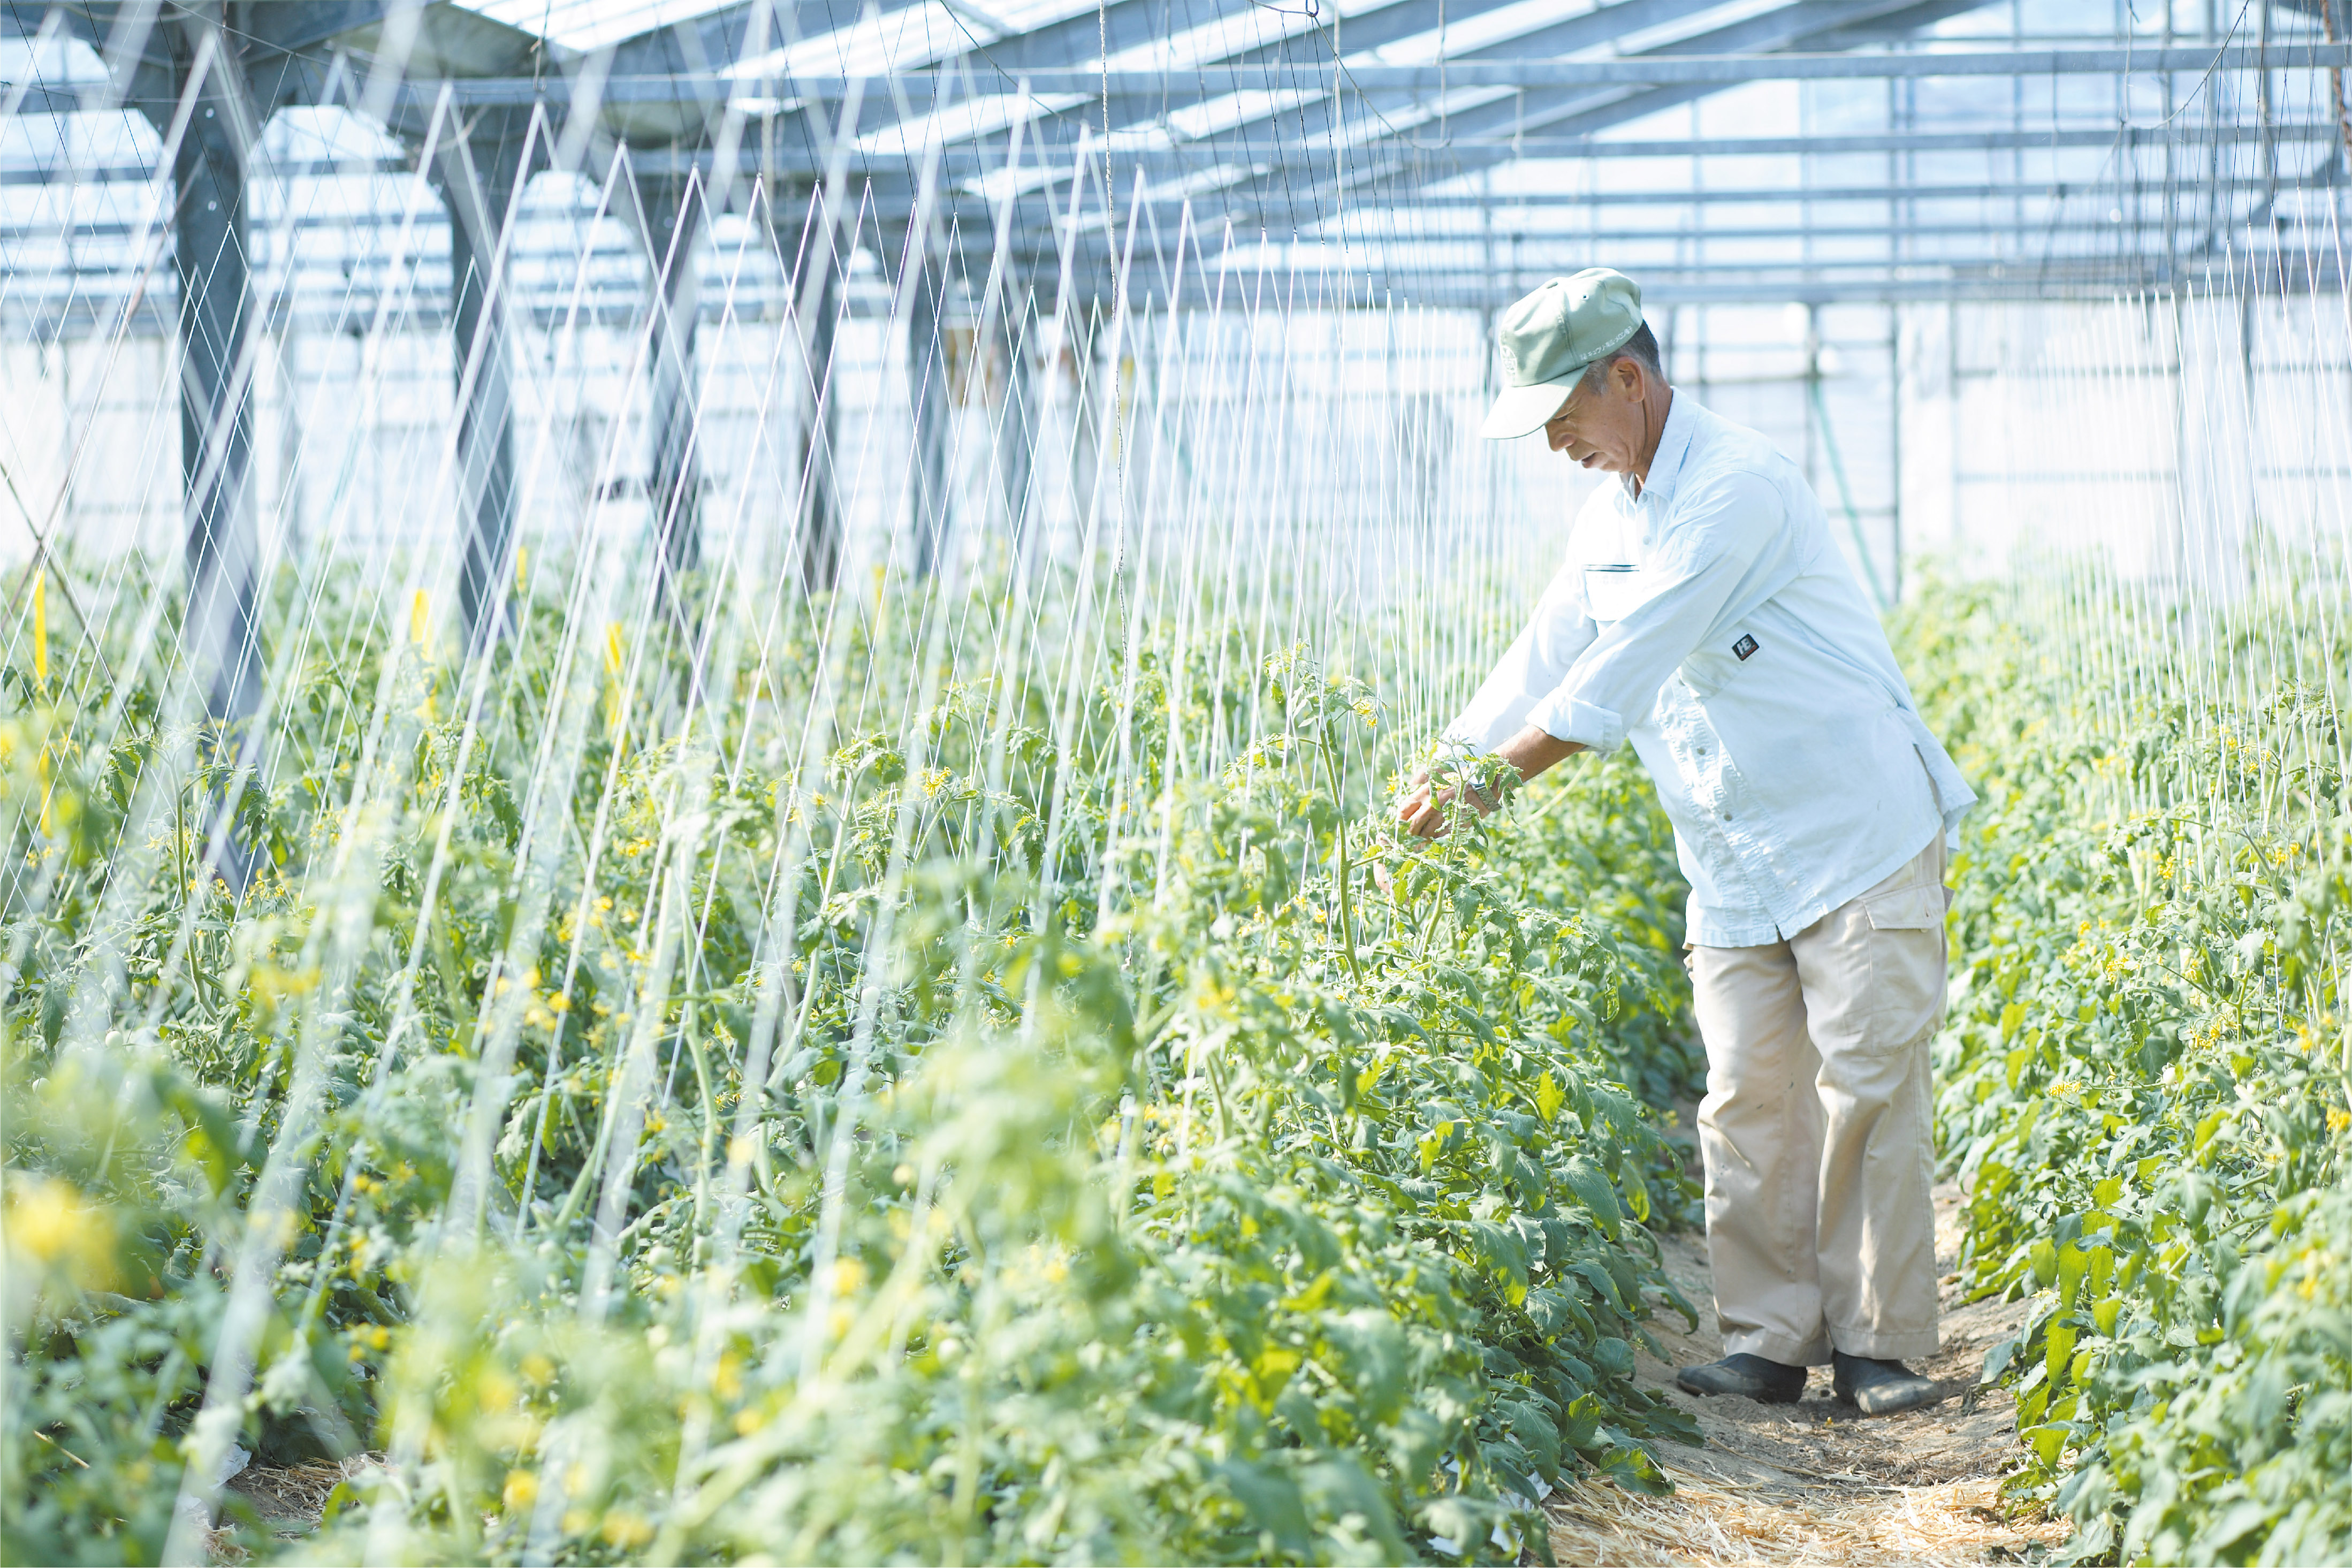 A Cucumber Farm Quickly Recovered After the Nuclear Plant Accident in Fukushima